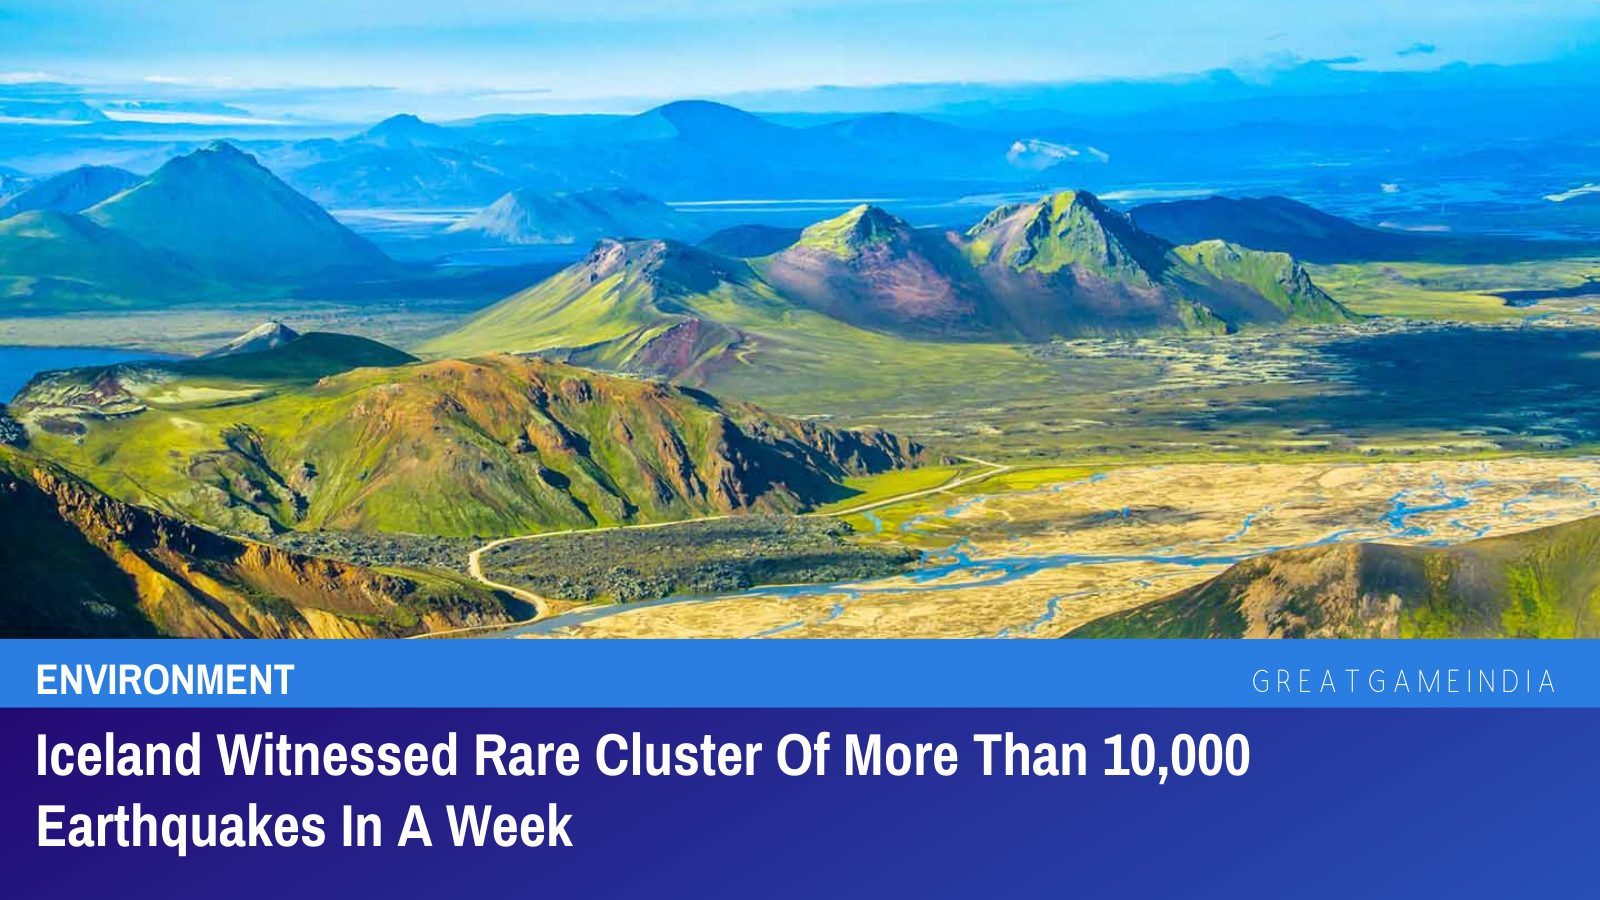 Iceland Witnessed Rare Cluster Of More Than 10,000 Earthquakes In A Week